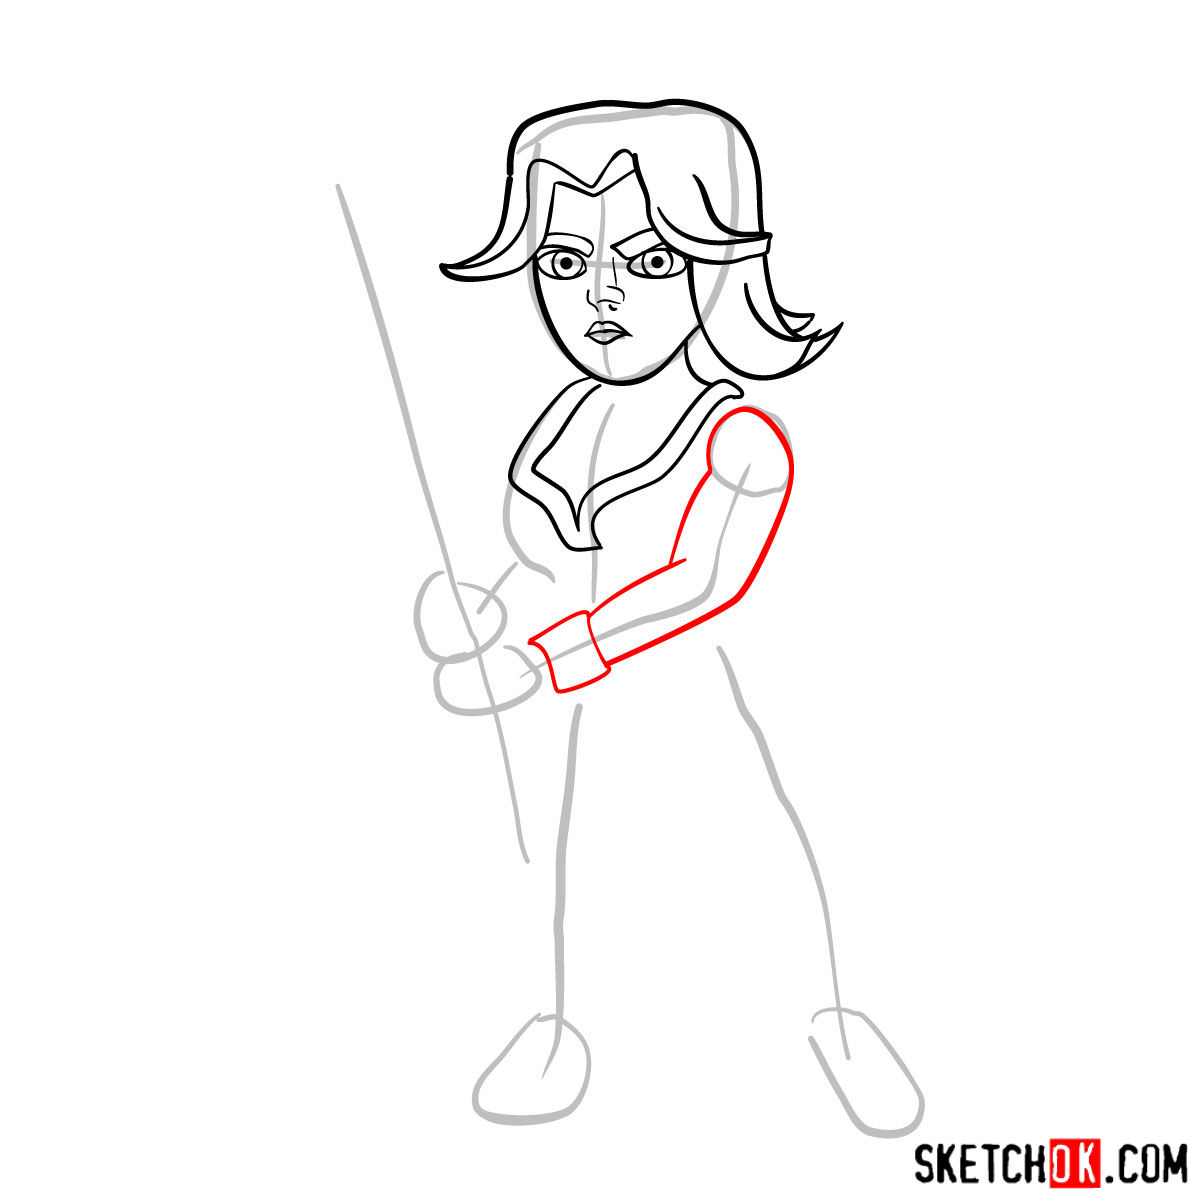 How to draw Valkyrie from Clash of Clans - step 05